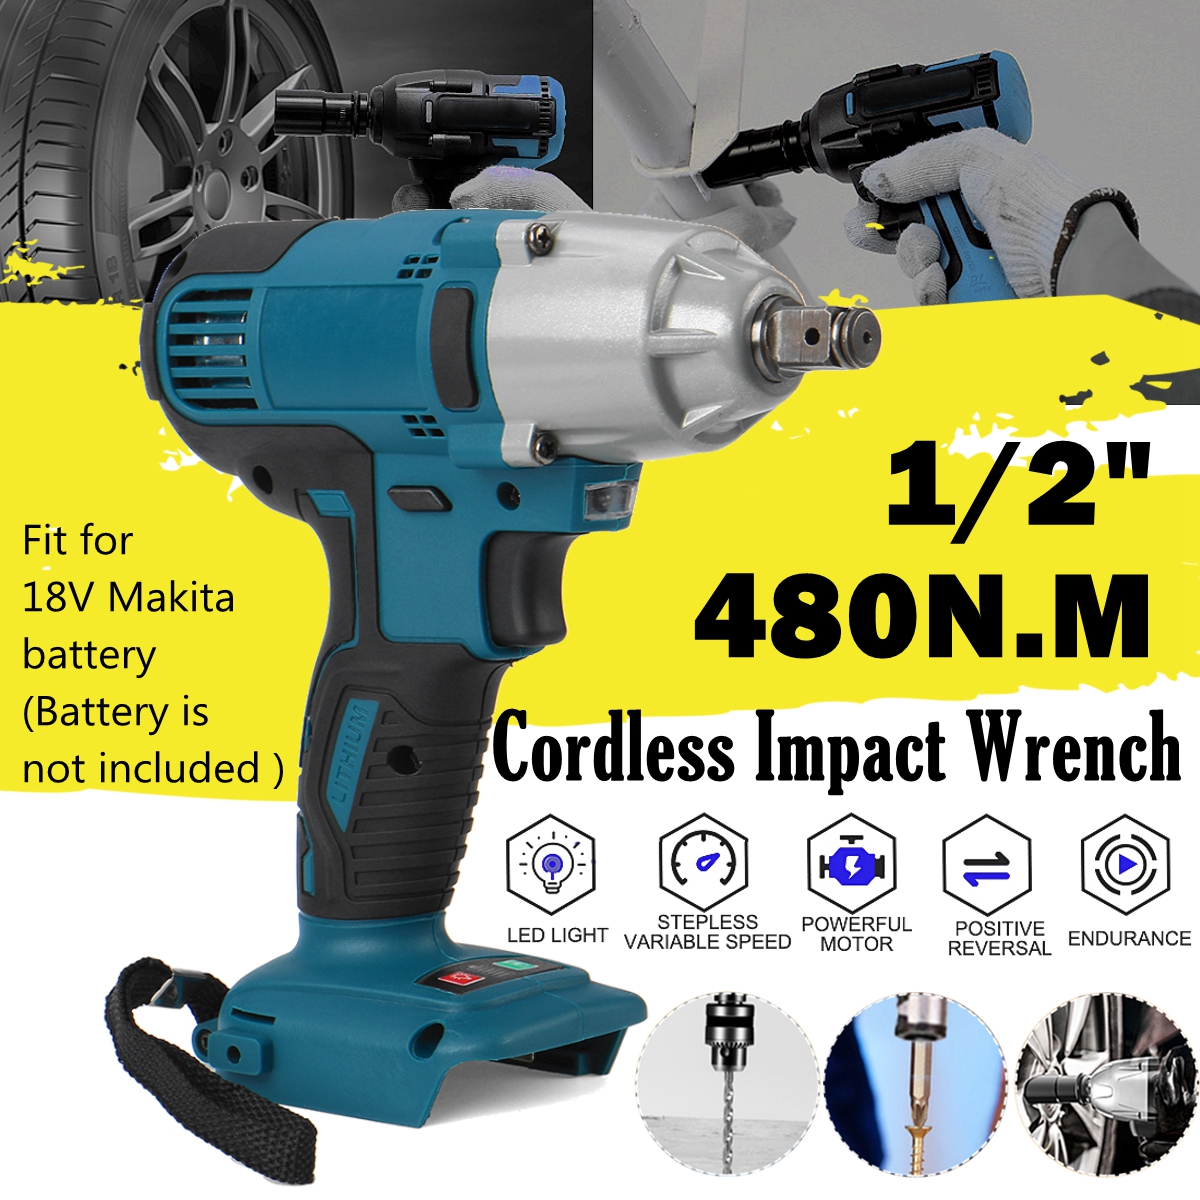 18V-480Nm-Li-Ion-Cordless-Impact-Wrench-Driver-12-Brushed-Electric-Wrench-Replacement-for-Makita-Bat-1658554-1